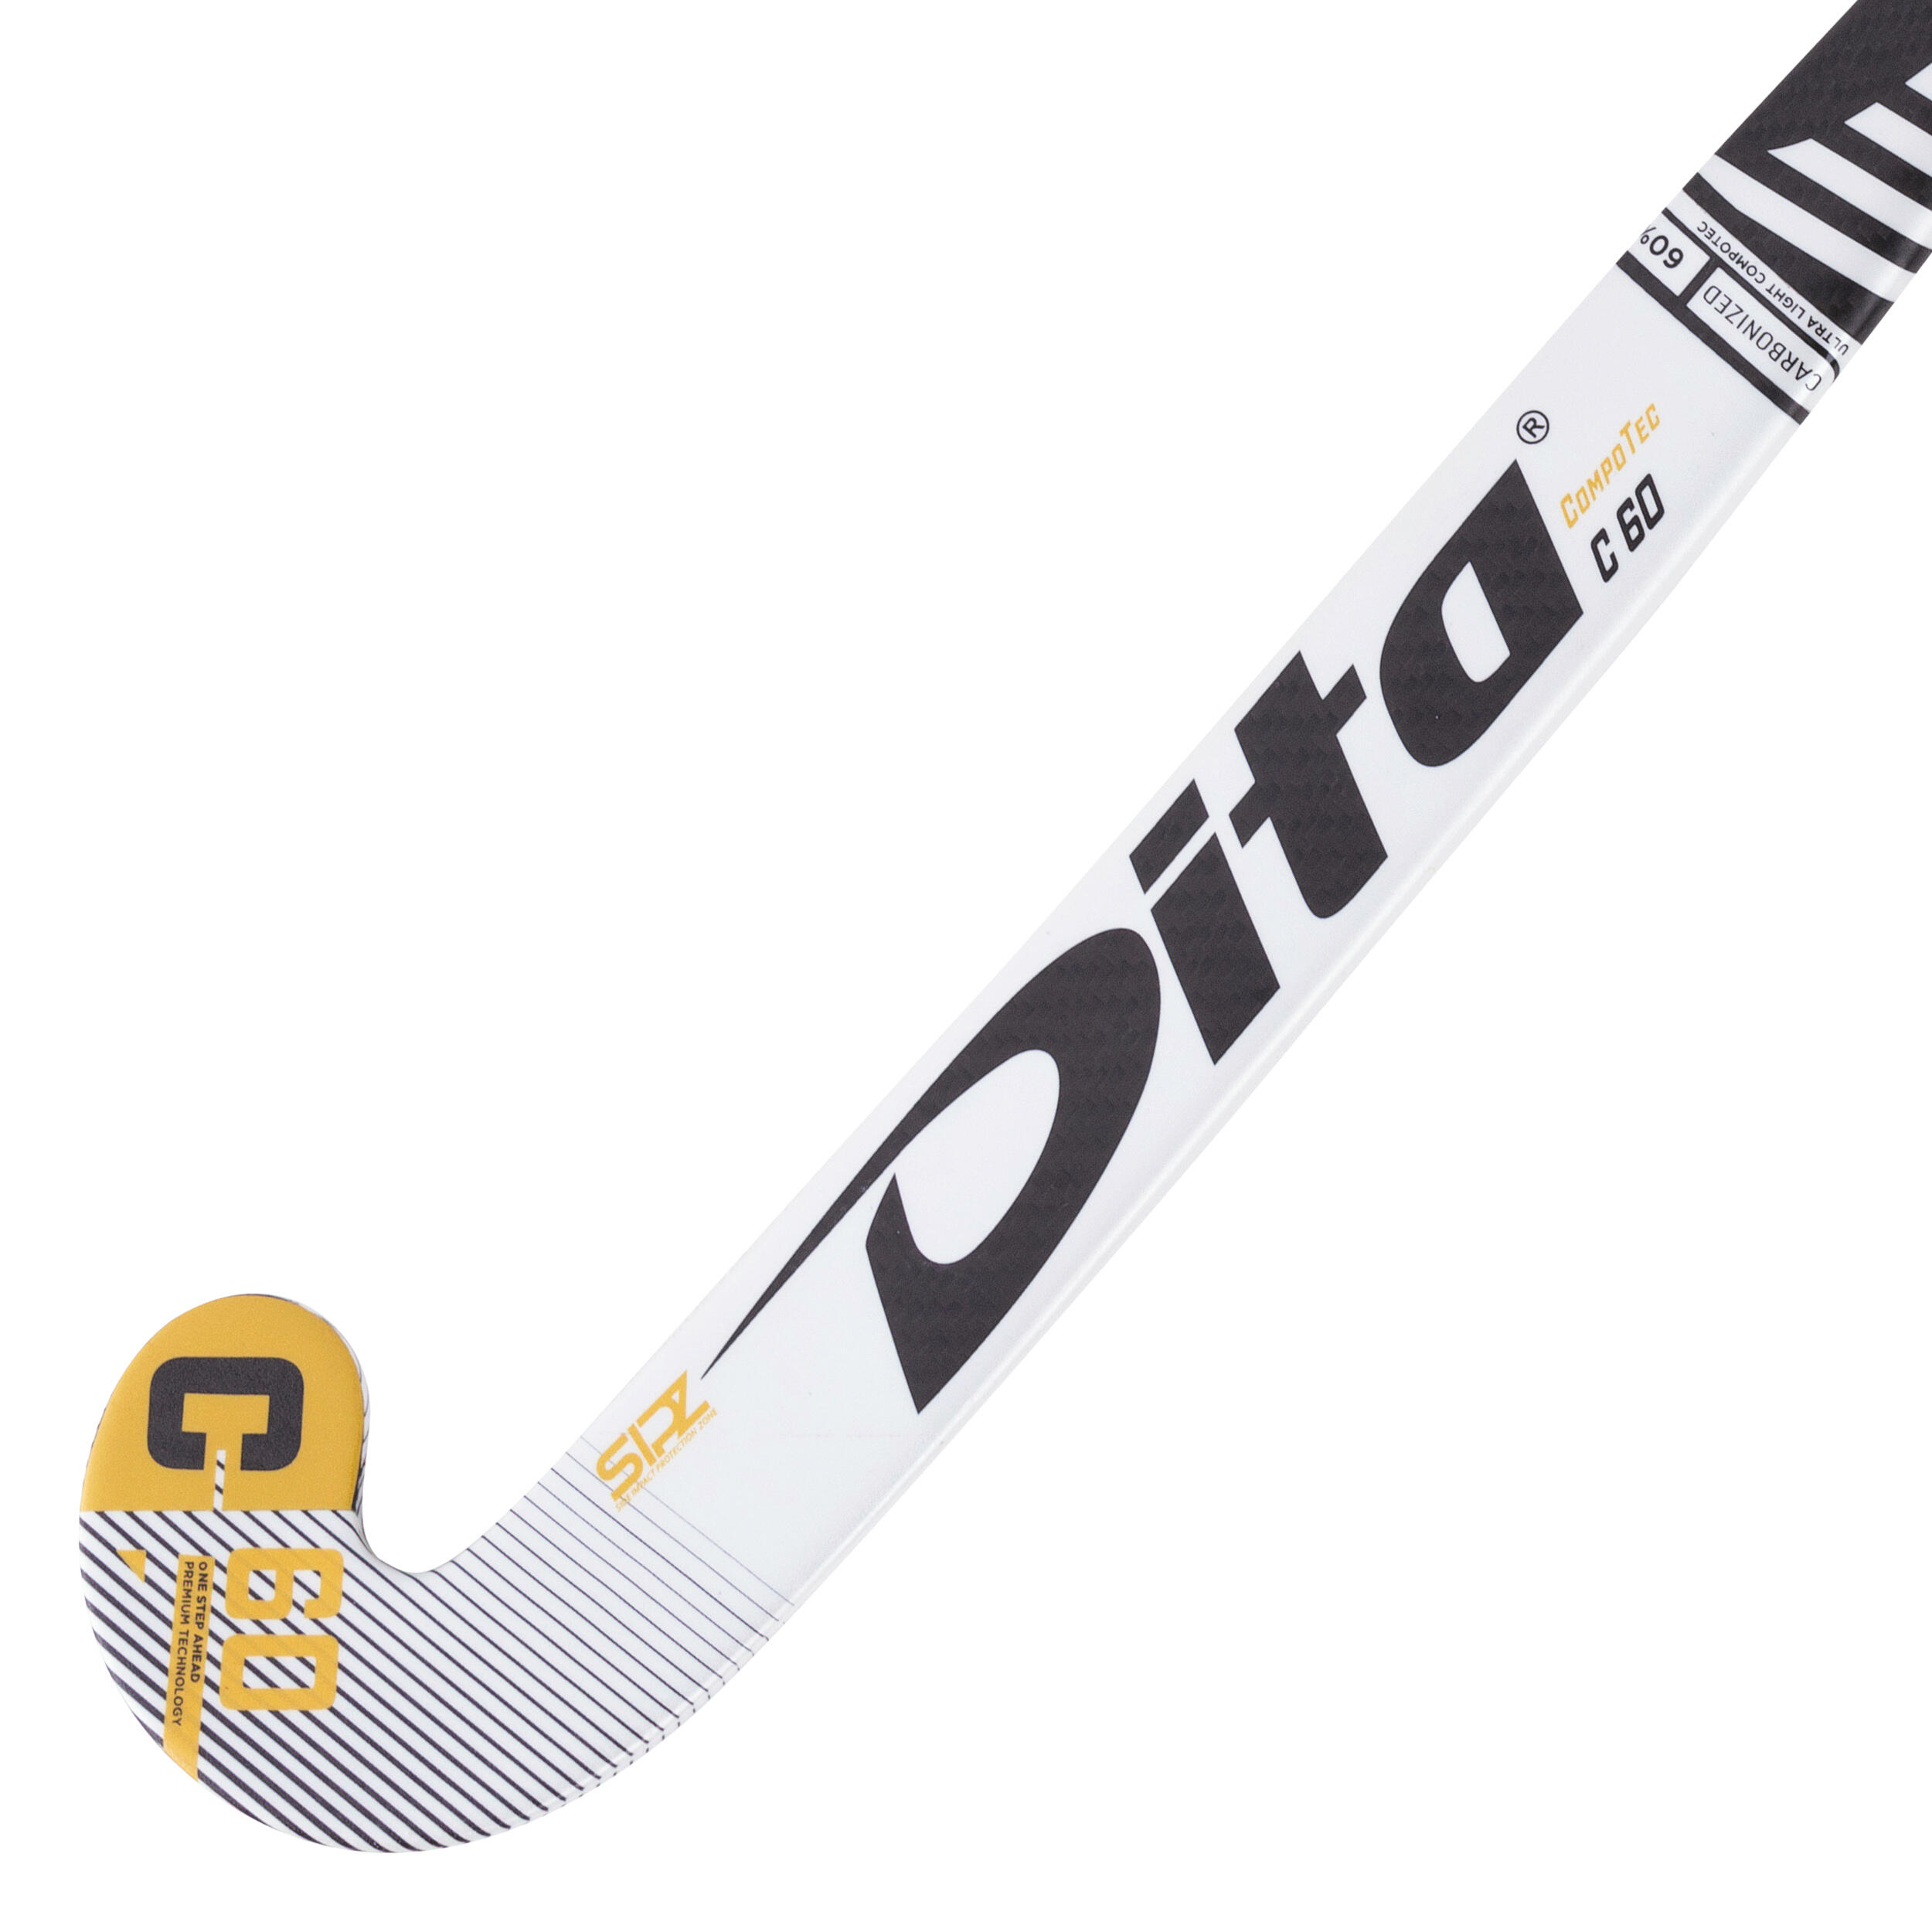 Adult Field Hockey Advanced 60% Carbon X-Low Bow Stick CompotecC60 - White/Black 3/12